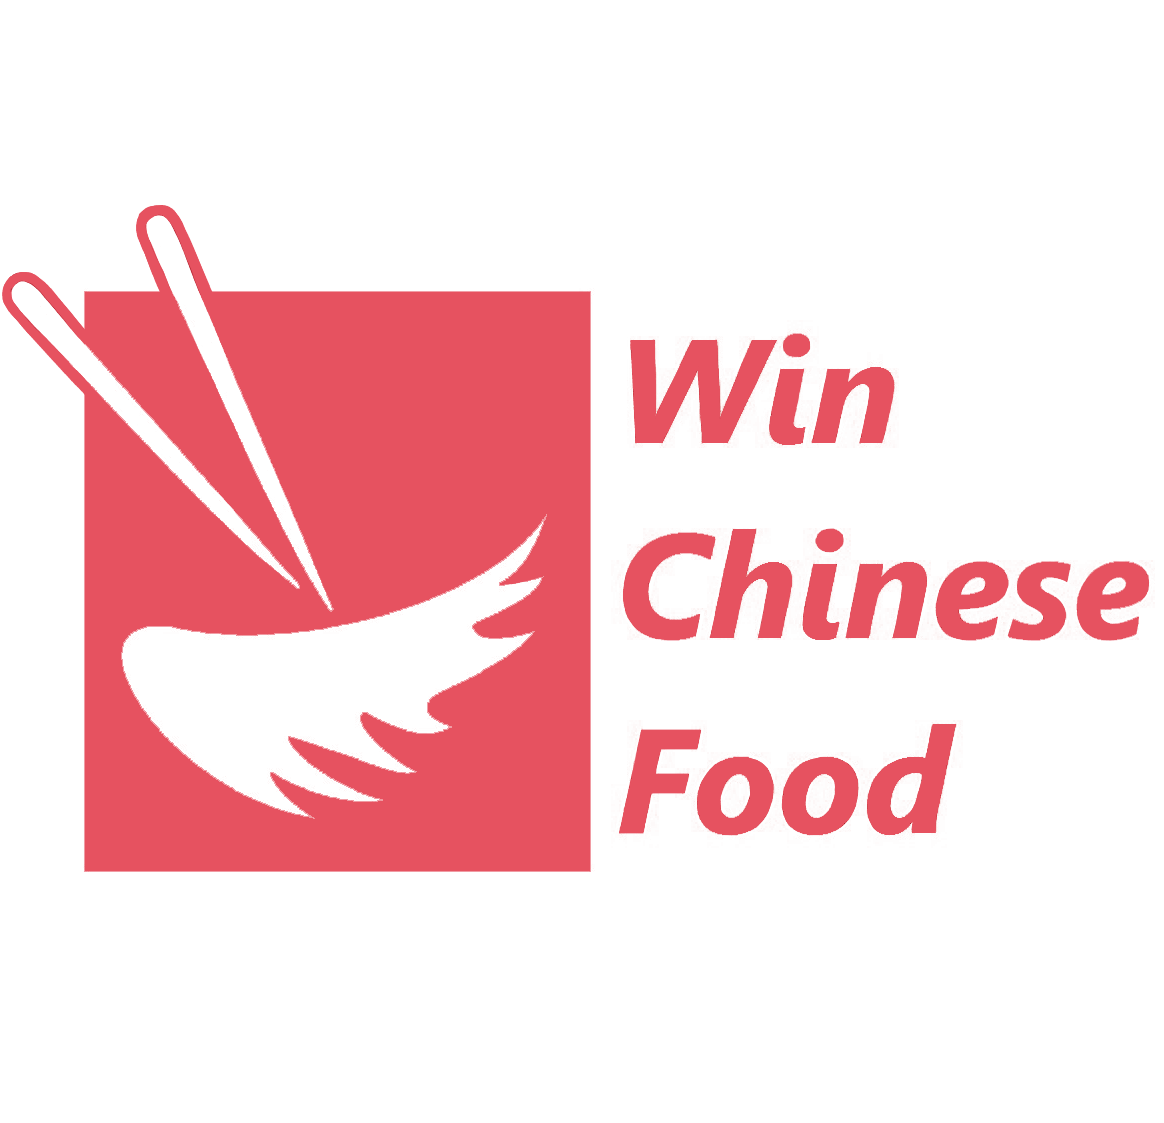 Win Chinese Food